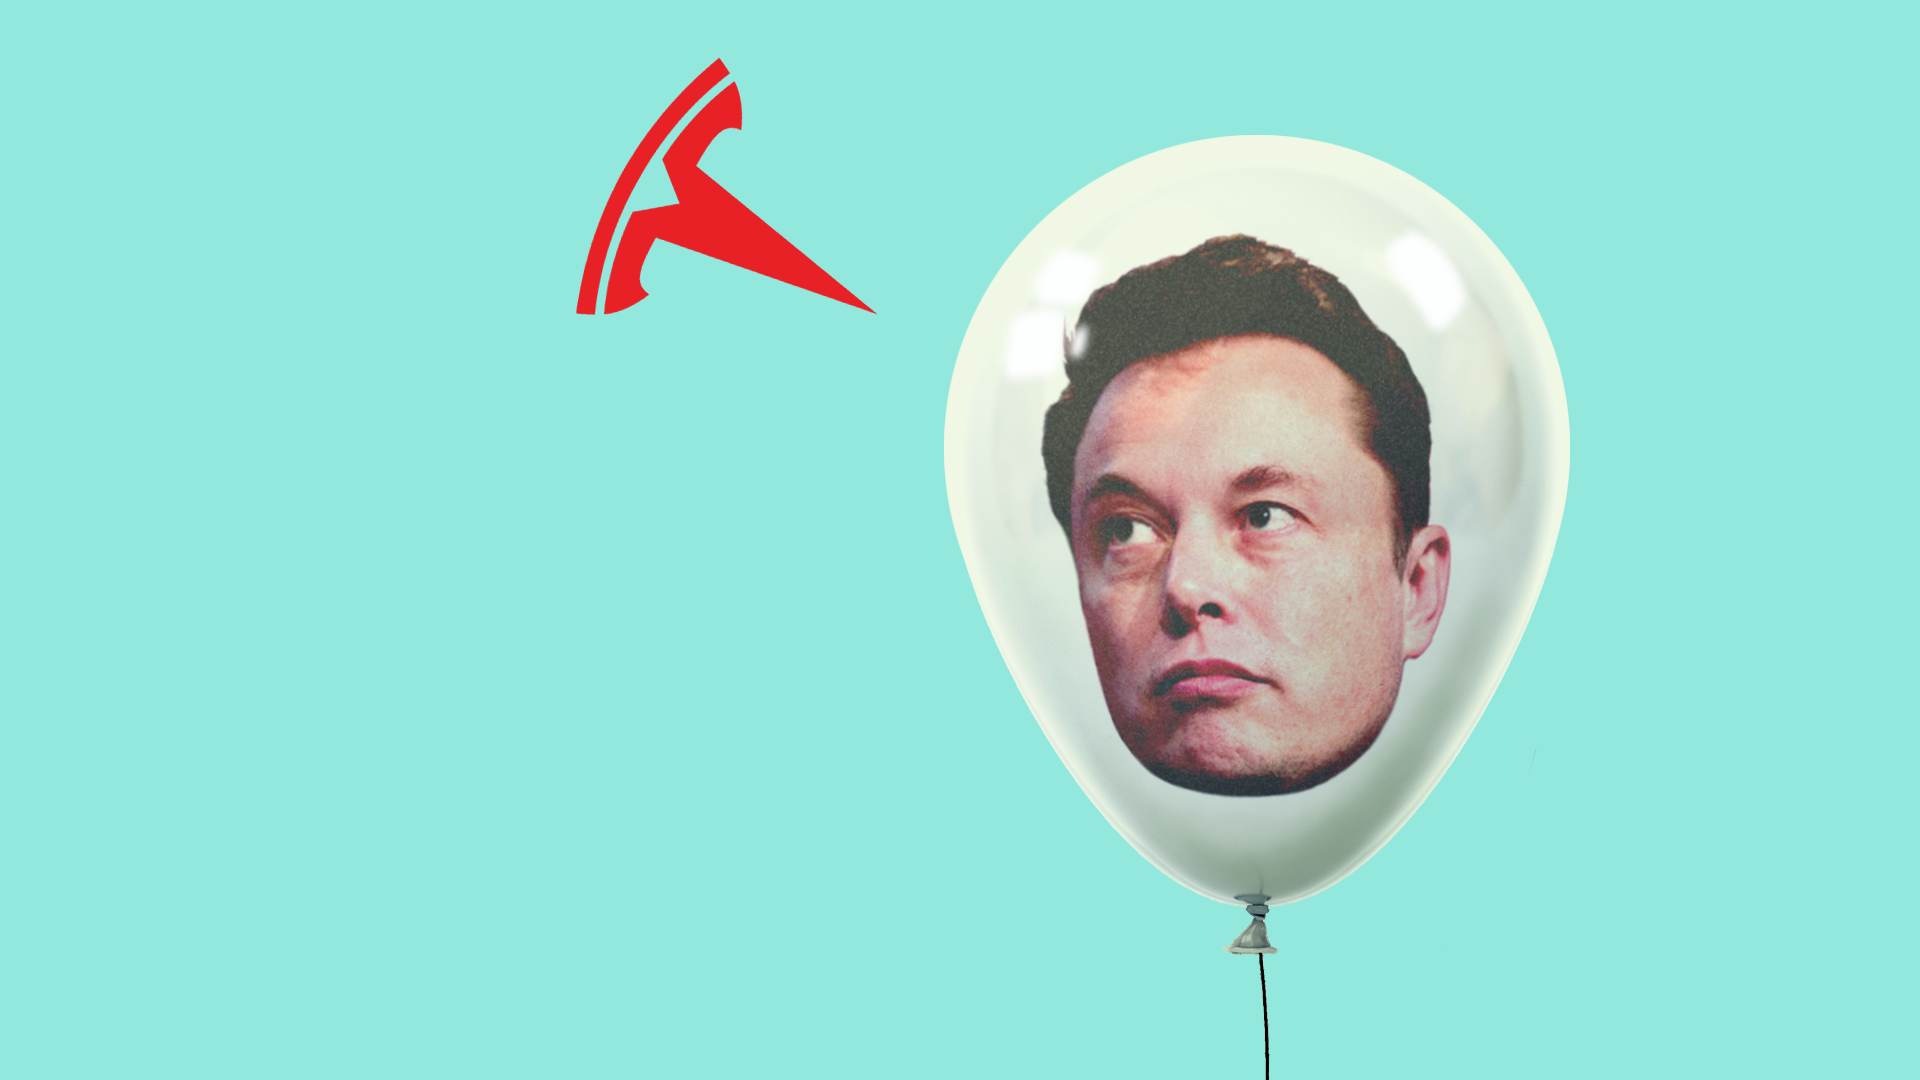 Illustration of Elon Musk's head in a balloon about to be popped